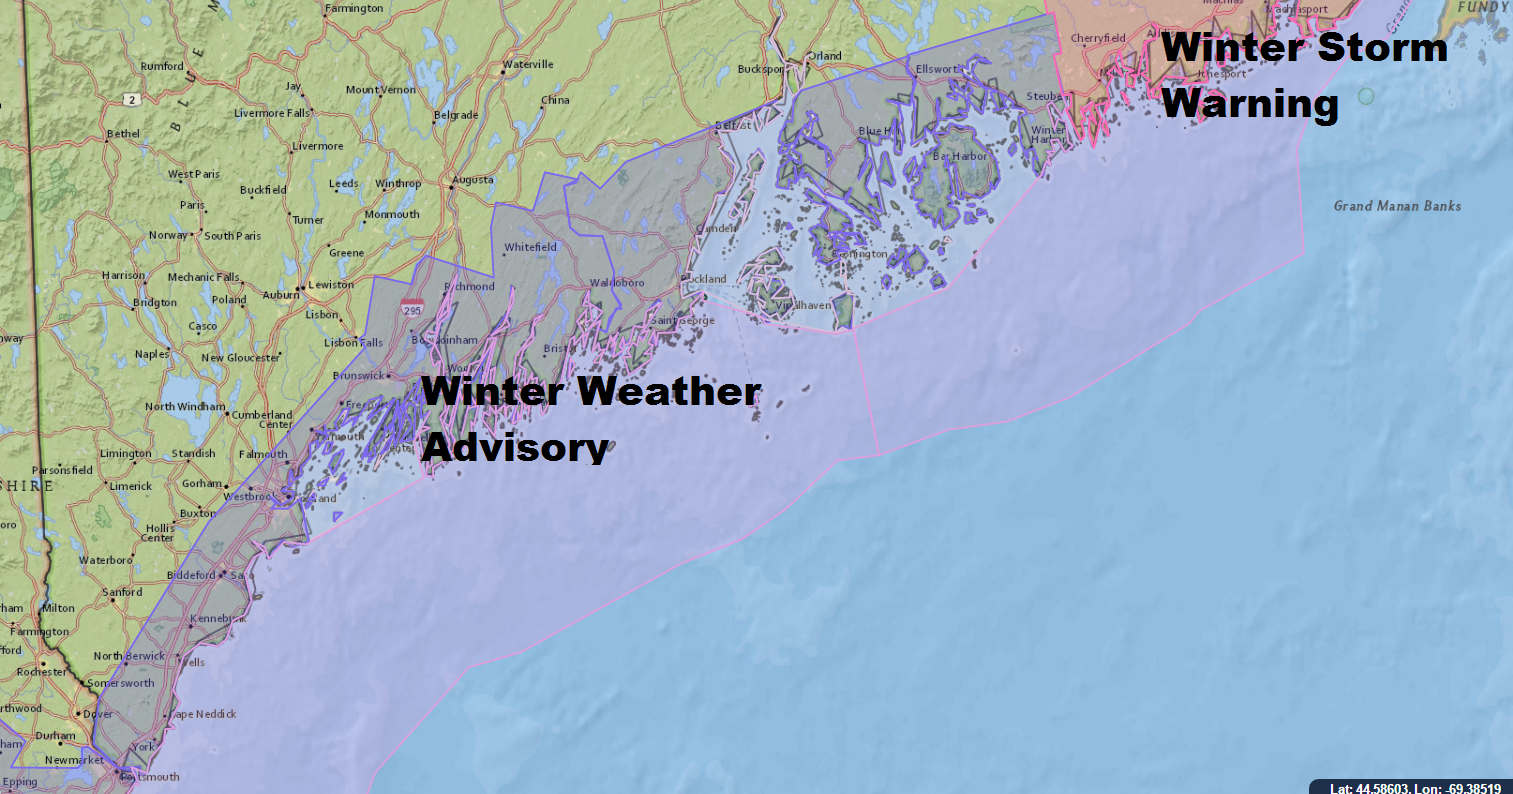 Winter Weather Advisories Due To Snow Are Posted Along The Coast Of Maine